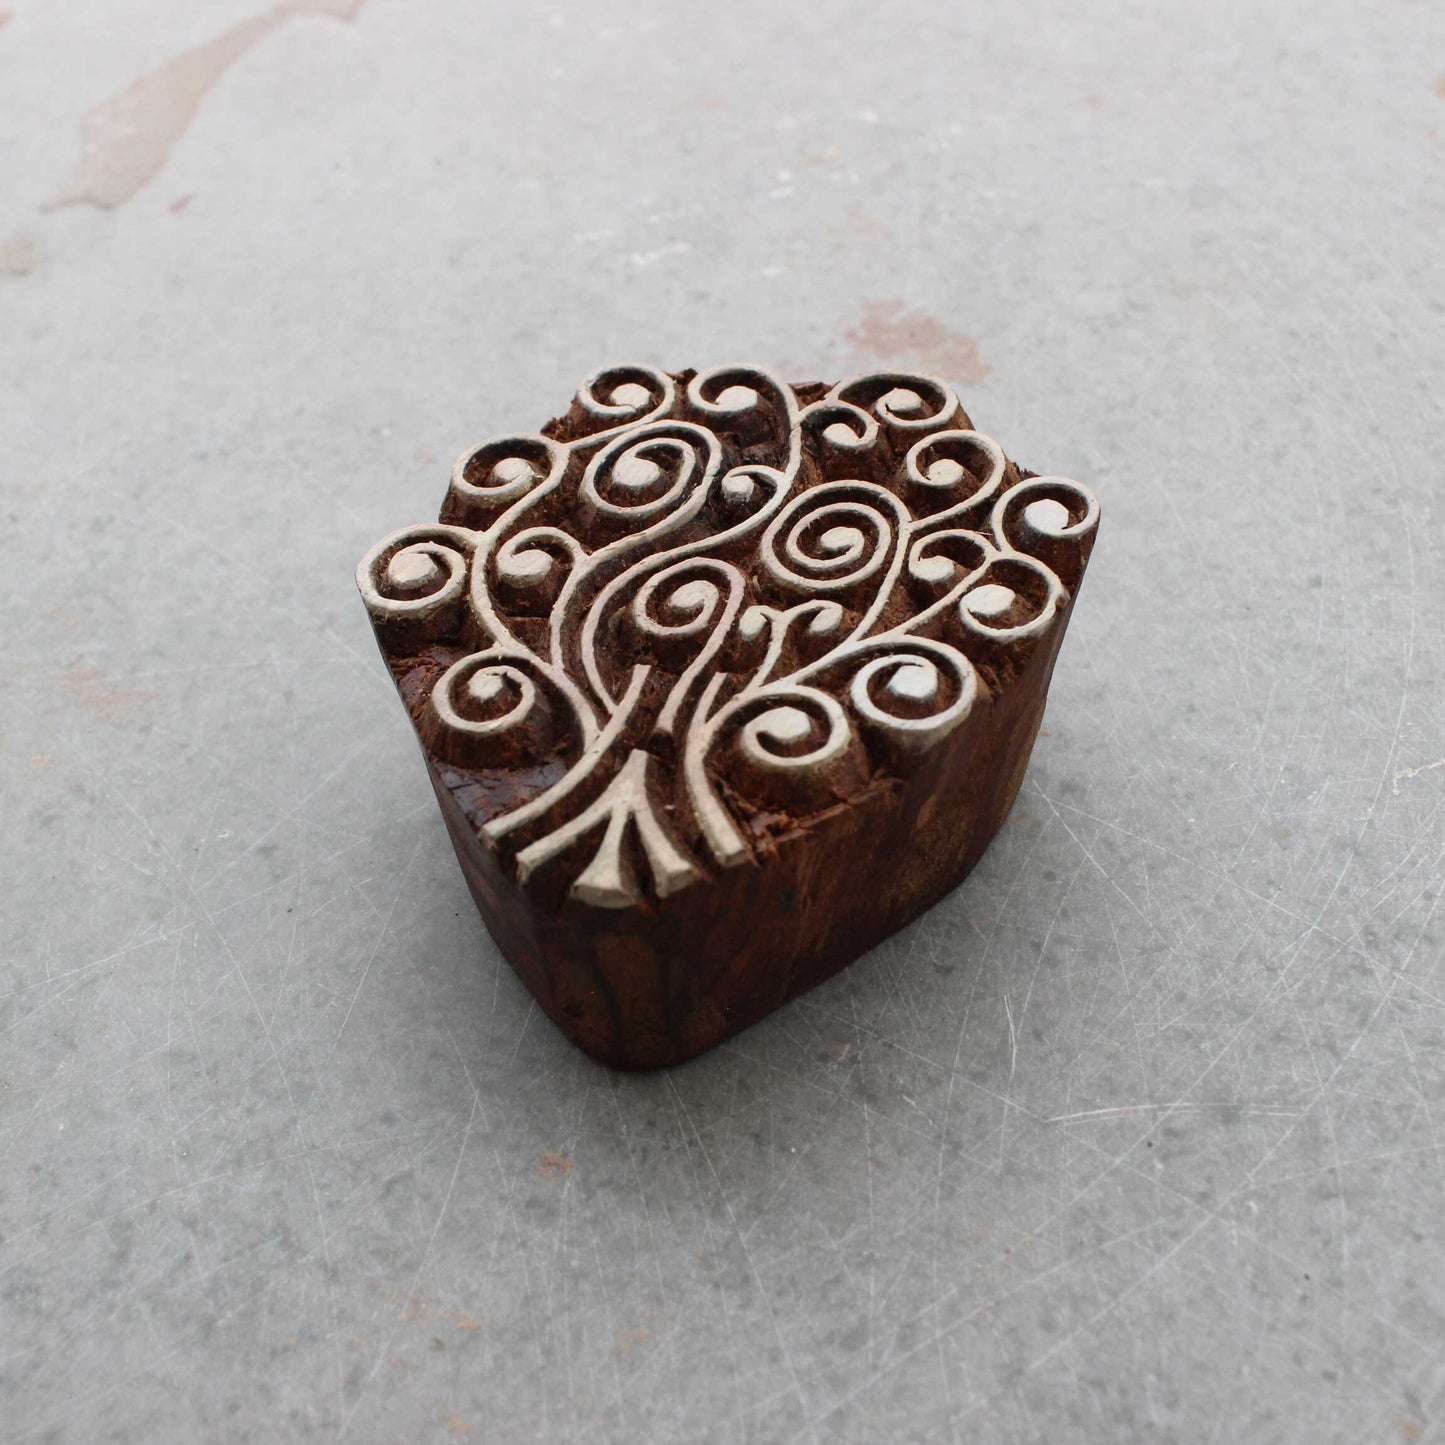 Tree Wood Block Stamp Celtic Fabric Stamp Hand Carved Stamp Indian Textile Printing Block For Printing Tree Of Life Soap Stamp Bohemian